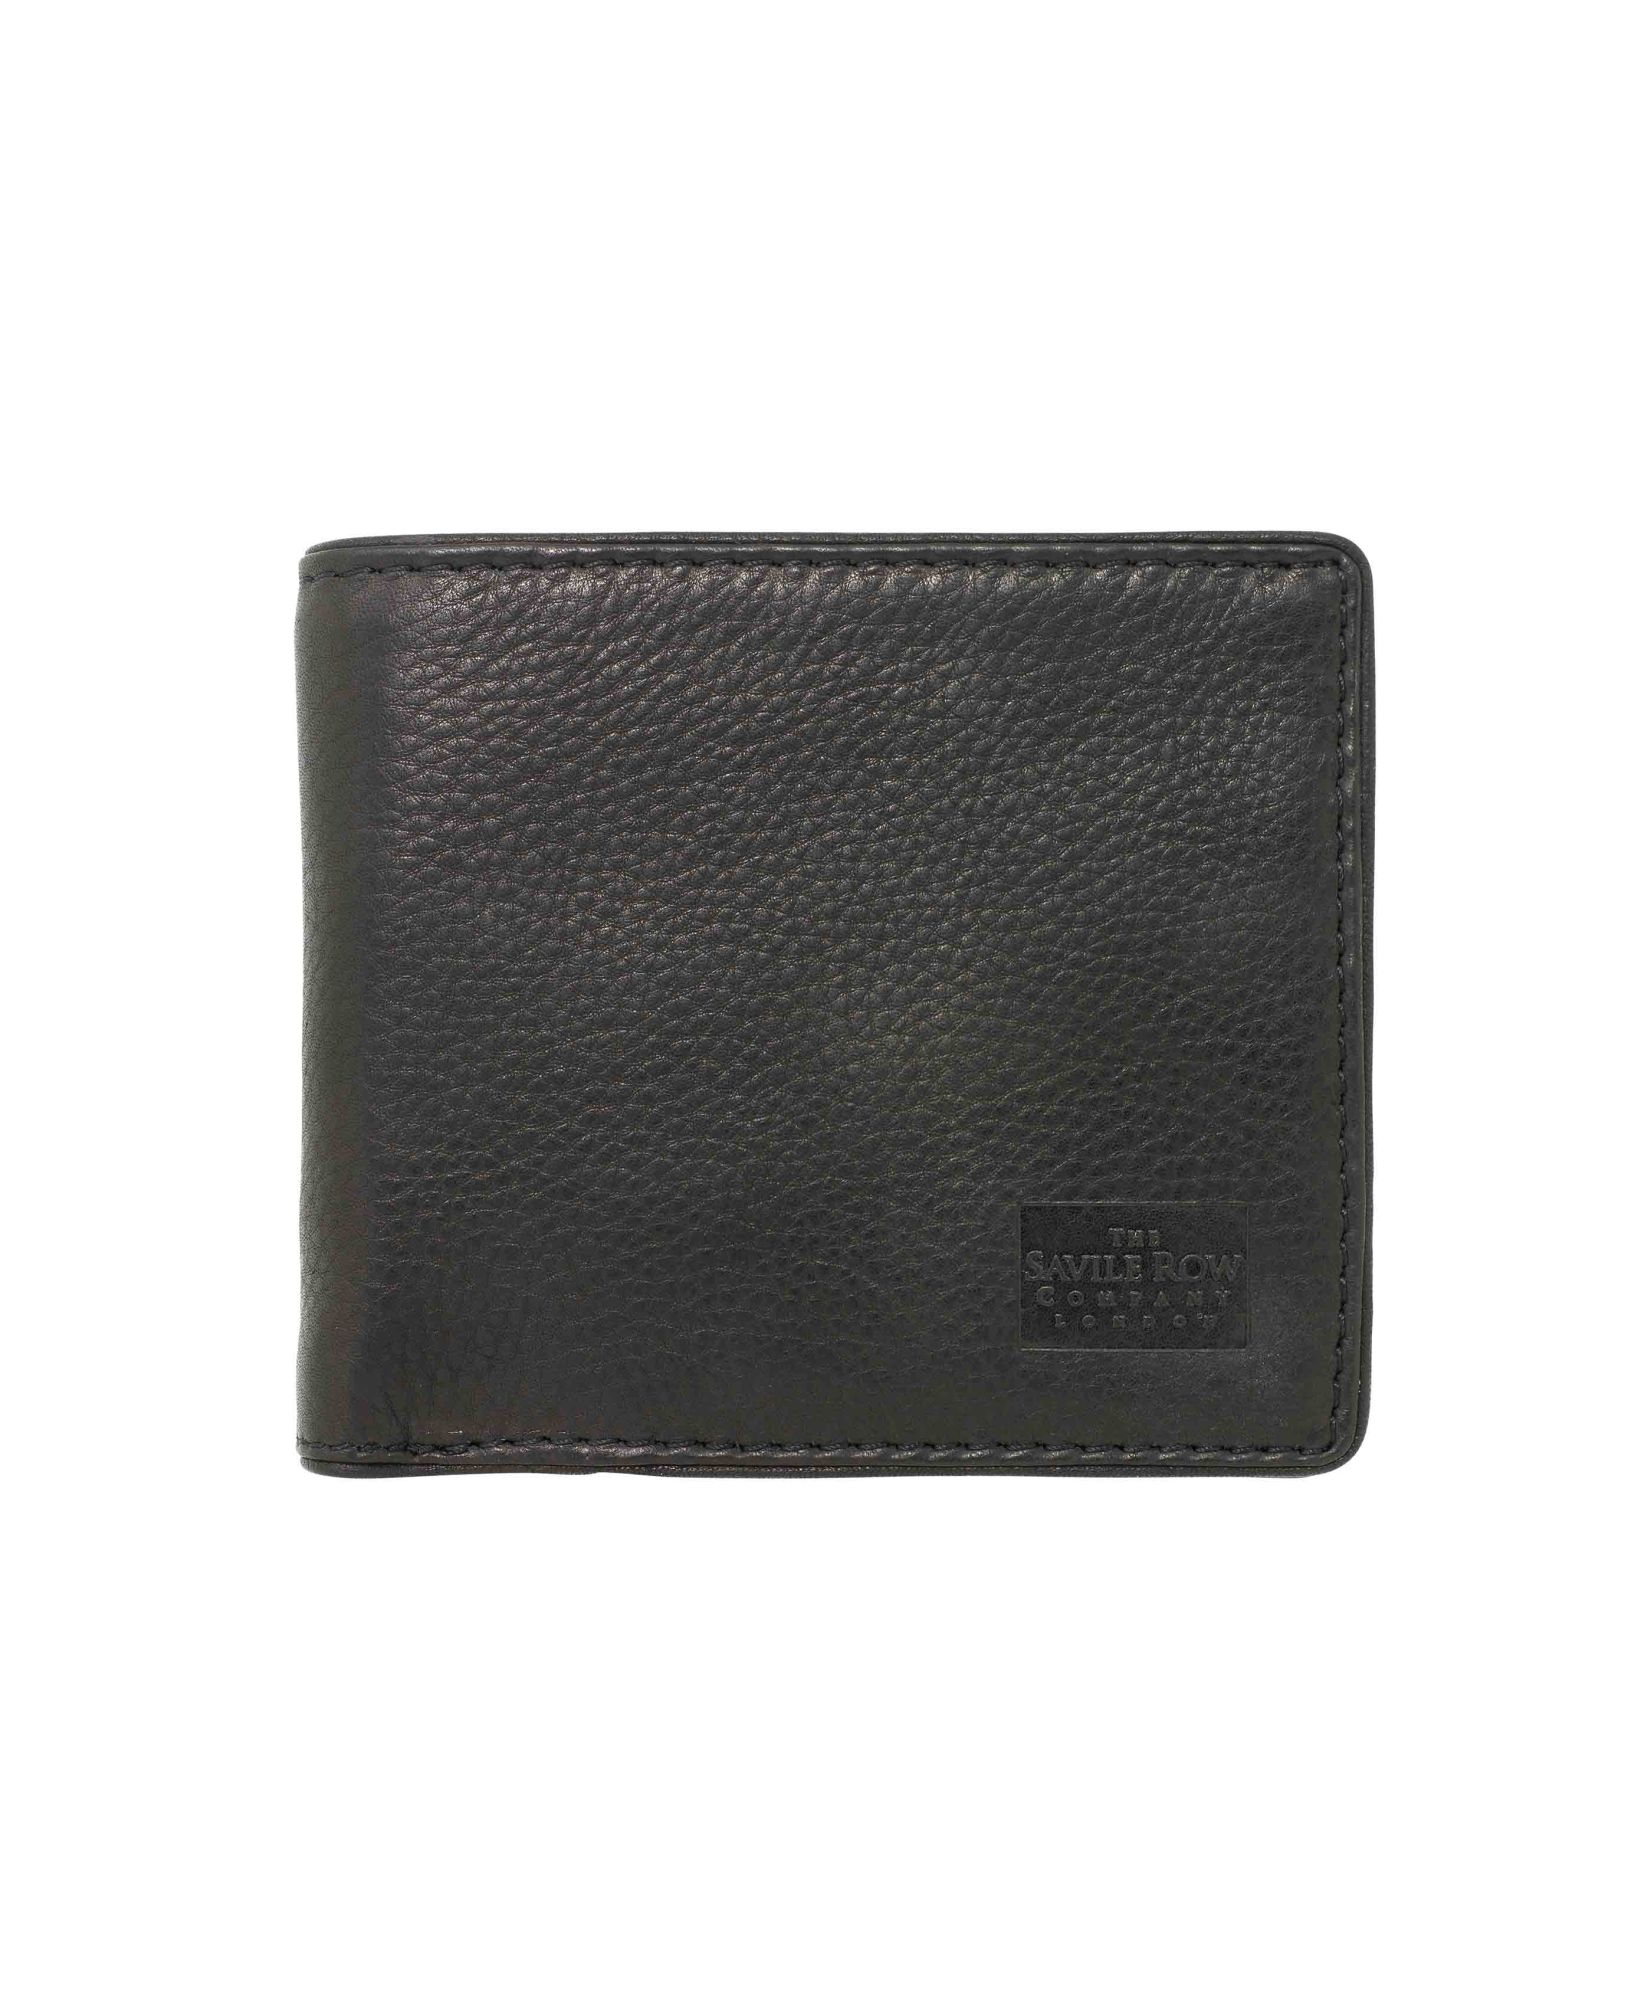 Image of Black Leather Classic Billfold Wallet with Coin Pouch